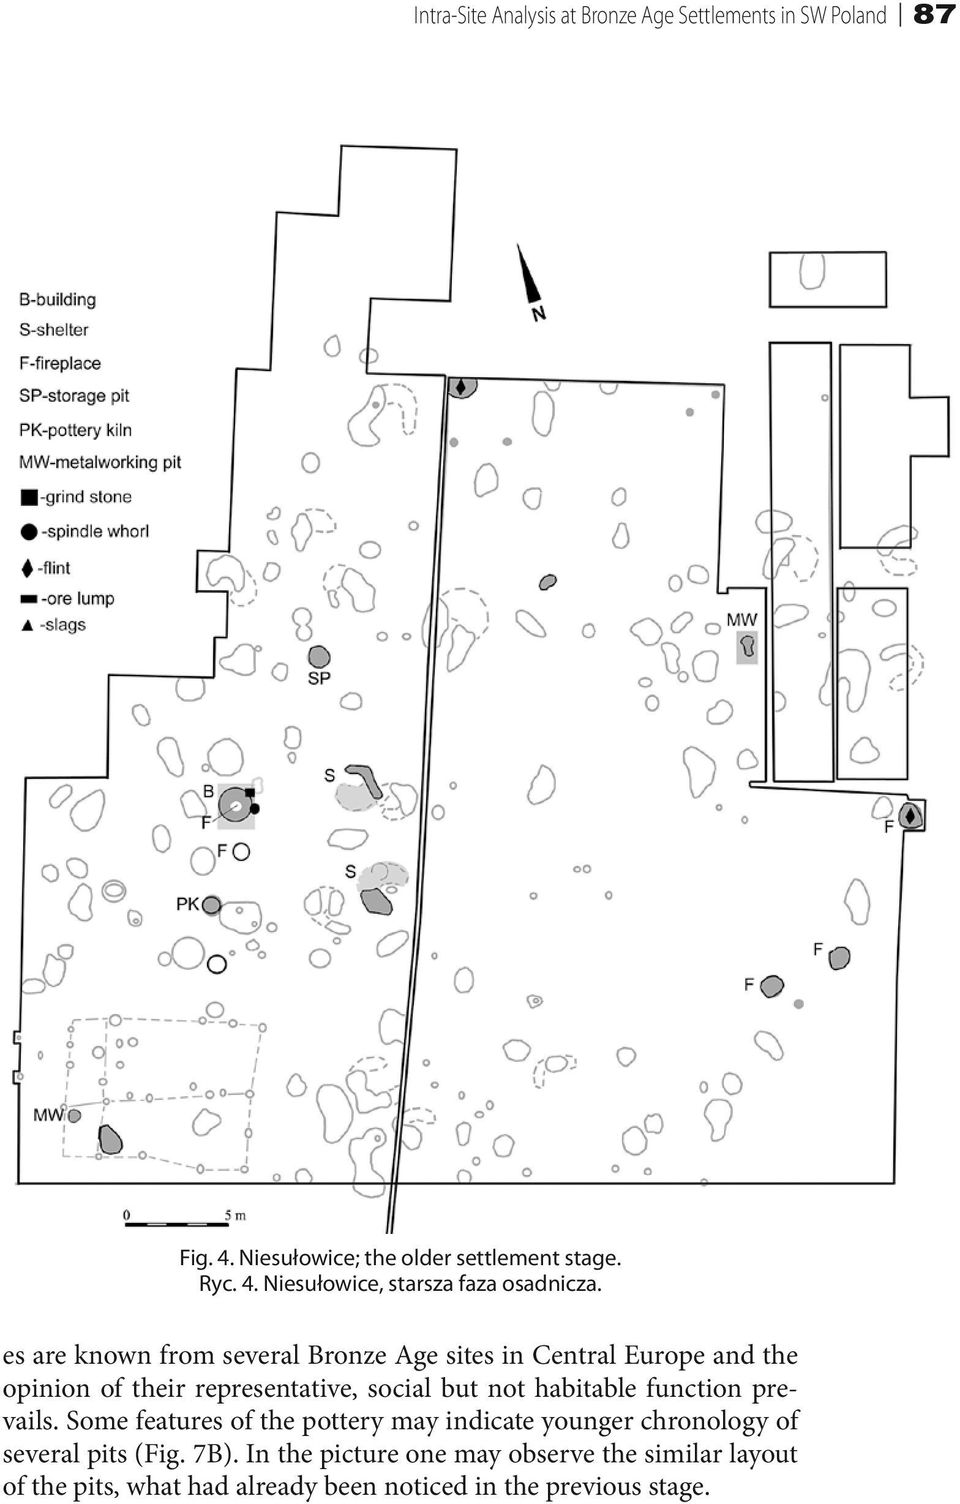 function prevails. Some features of the pottery may indicate younger chronology of several pits (Fig. 7B).